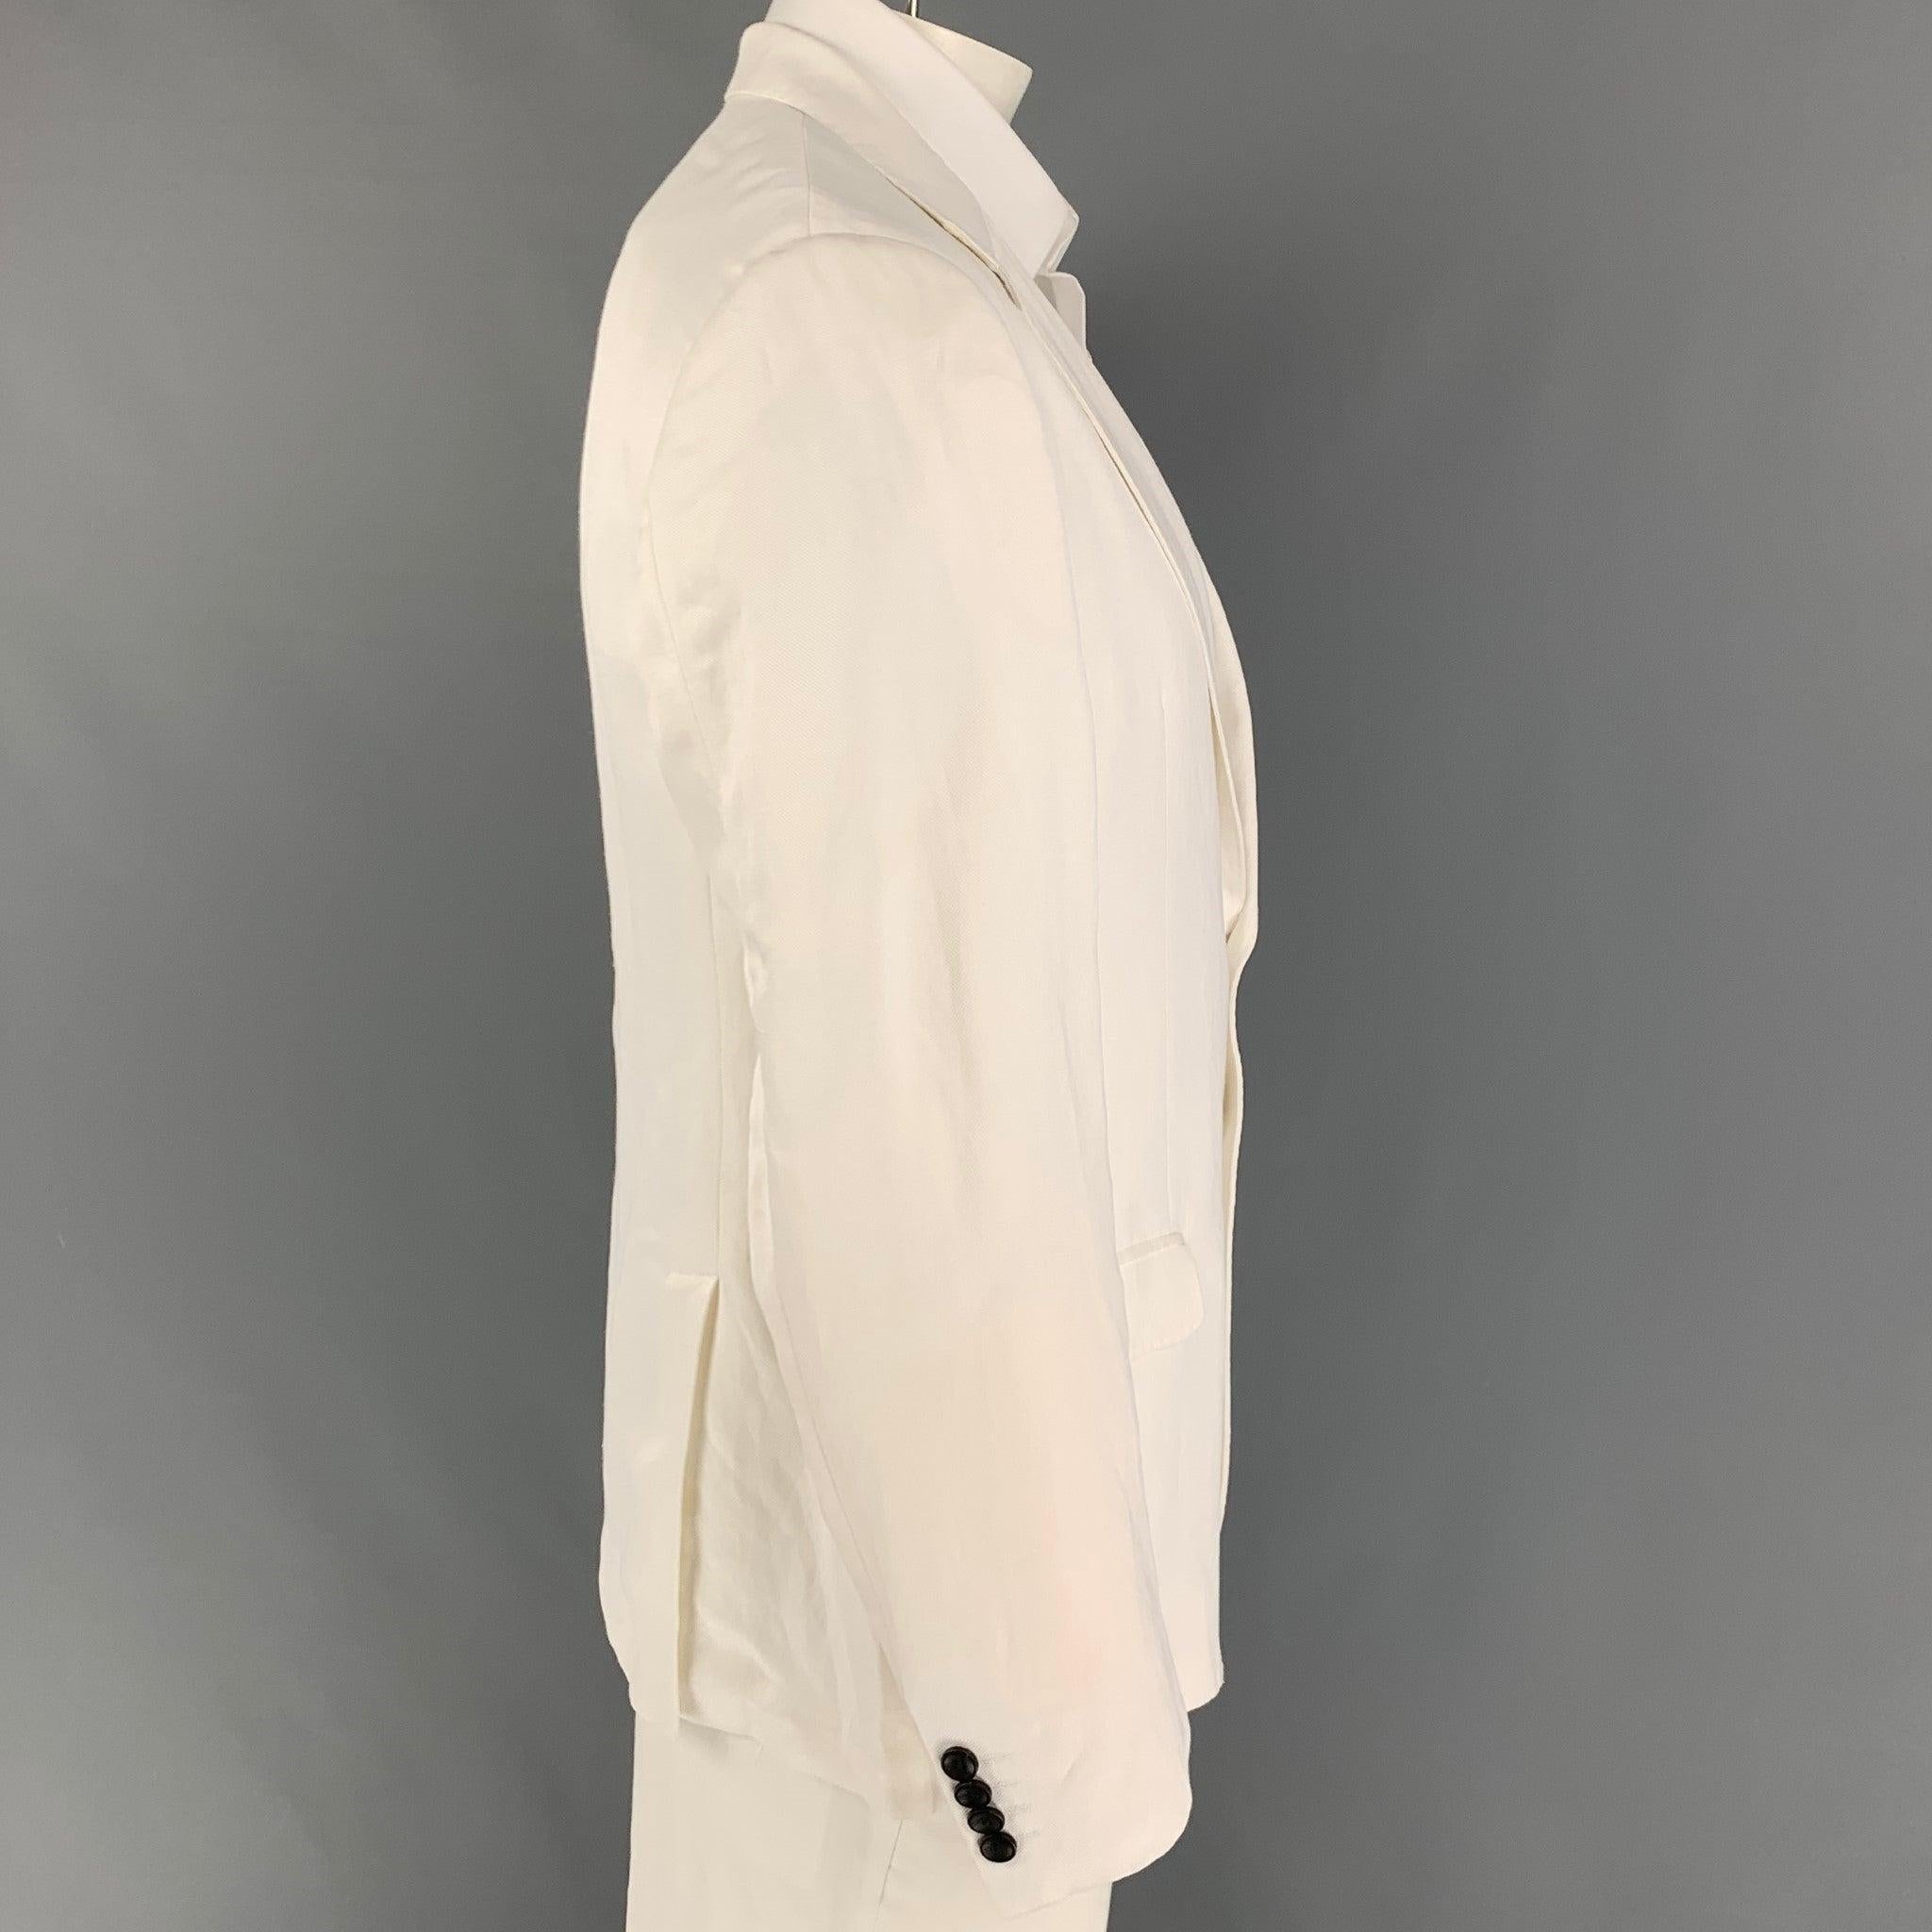 ARMANI COLLEZIONI sport coat comes in a white viscose / linen with a half liner featuring a notch lapel, flap pockets, double back vent, and a double button closure.
Good
Pre-Owned Condition. Minor wear. As-Is.  

Marked:   56 

Measurements: 
